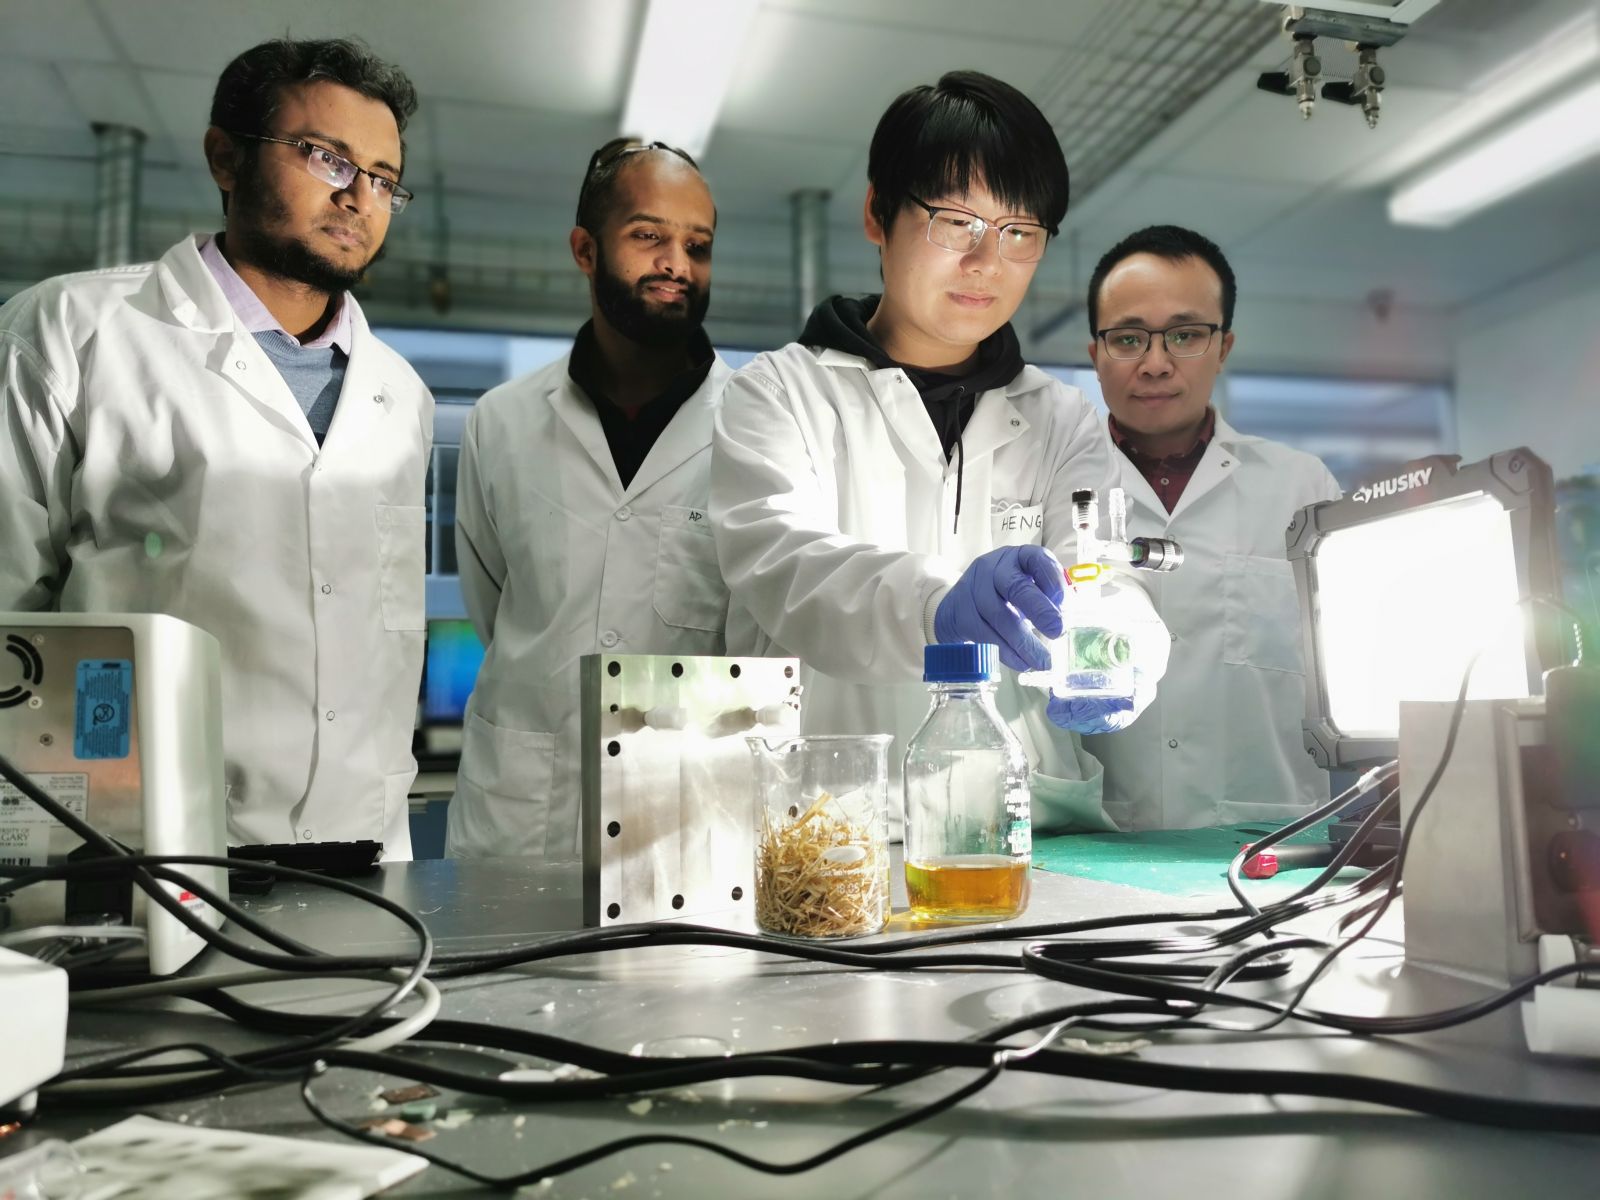 The UCalgary team is observing a photo-reactor that is being used for a photoreforming reaction with wheat straw. Left to right: Prof. Md Golam Kibria, Dr. Adnan Khan (Research Associate), Dr. Heng Zhao (Post doctoral fellow), Prof. Jinguang Hu. Credit: Prof. Hu and Kibria group.